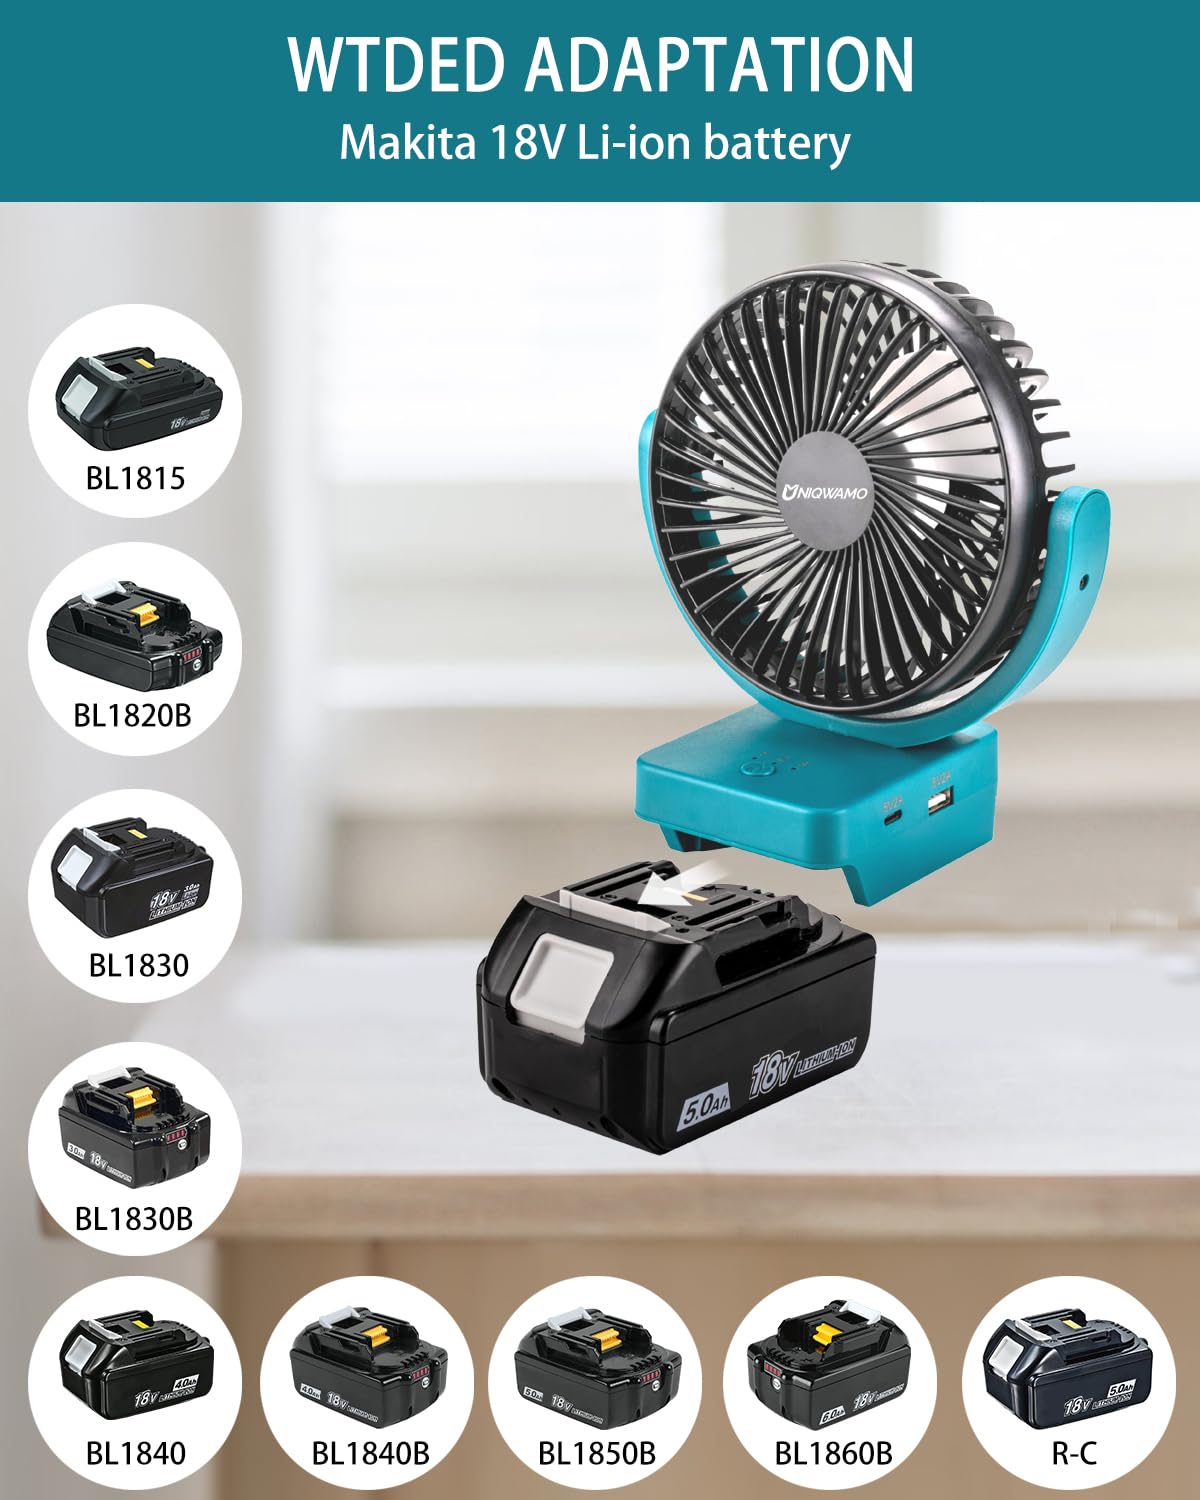 Uniqwamo Portable Rechargeable Fan for Makita 18V BL1860 BL1850 Lithium-Ion Battery, Jobsite Battery Operated Fan with 3 Speeds Control，USB +Type C